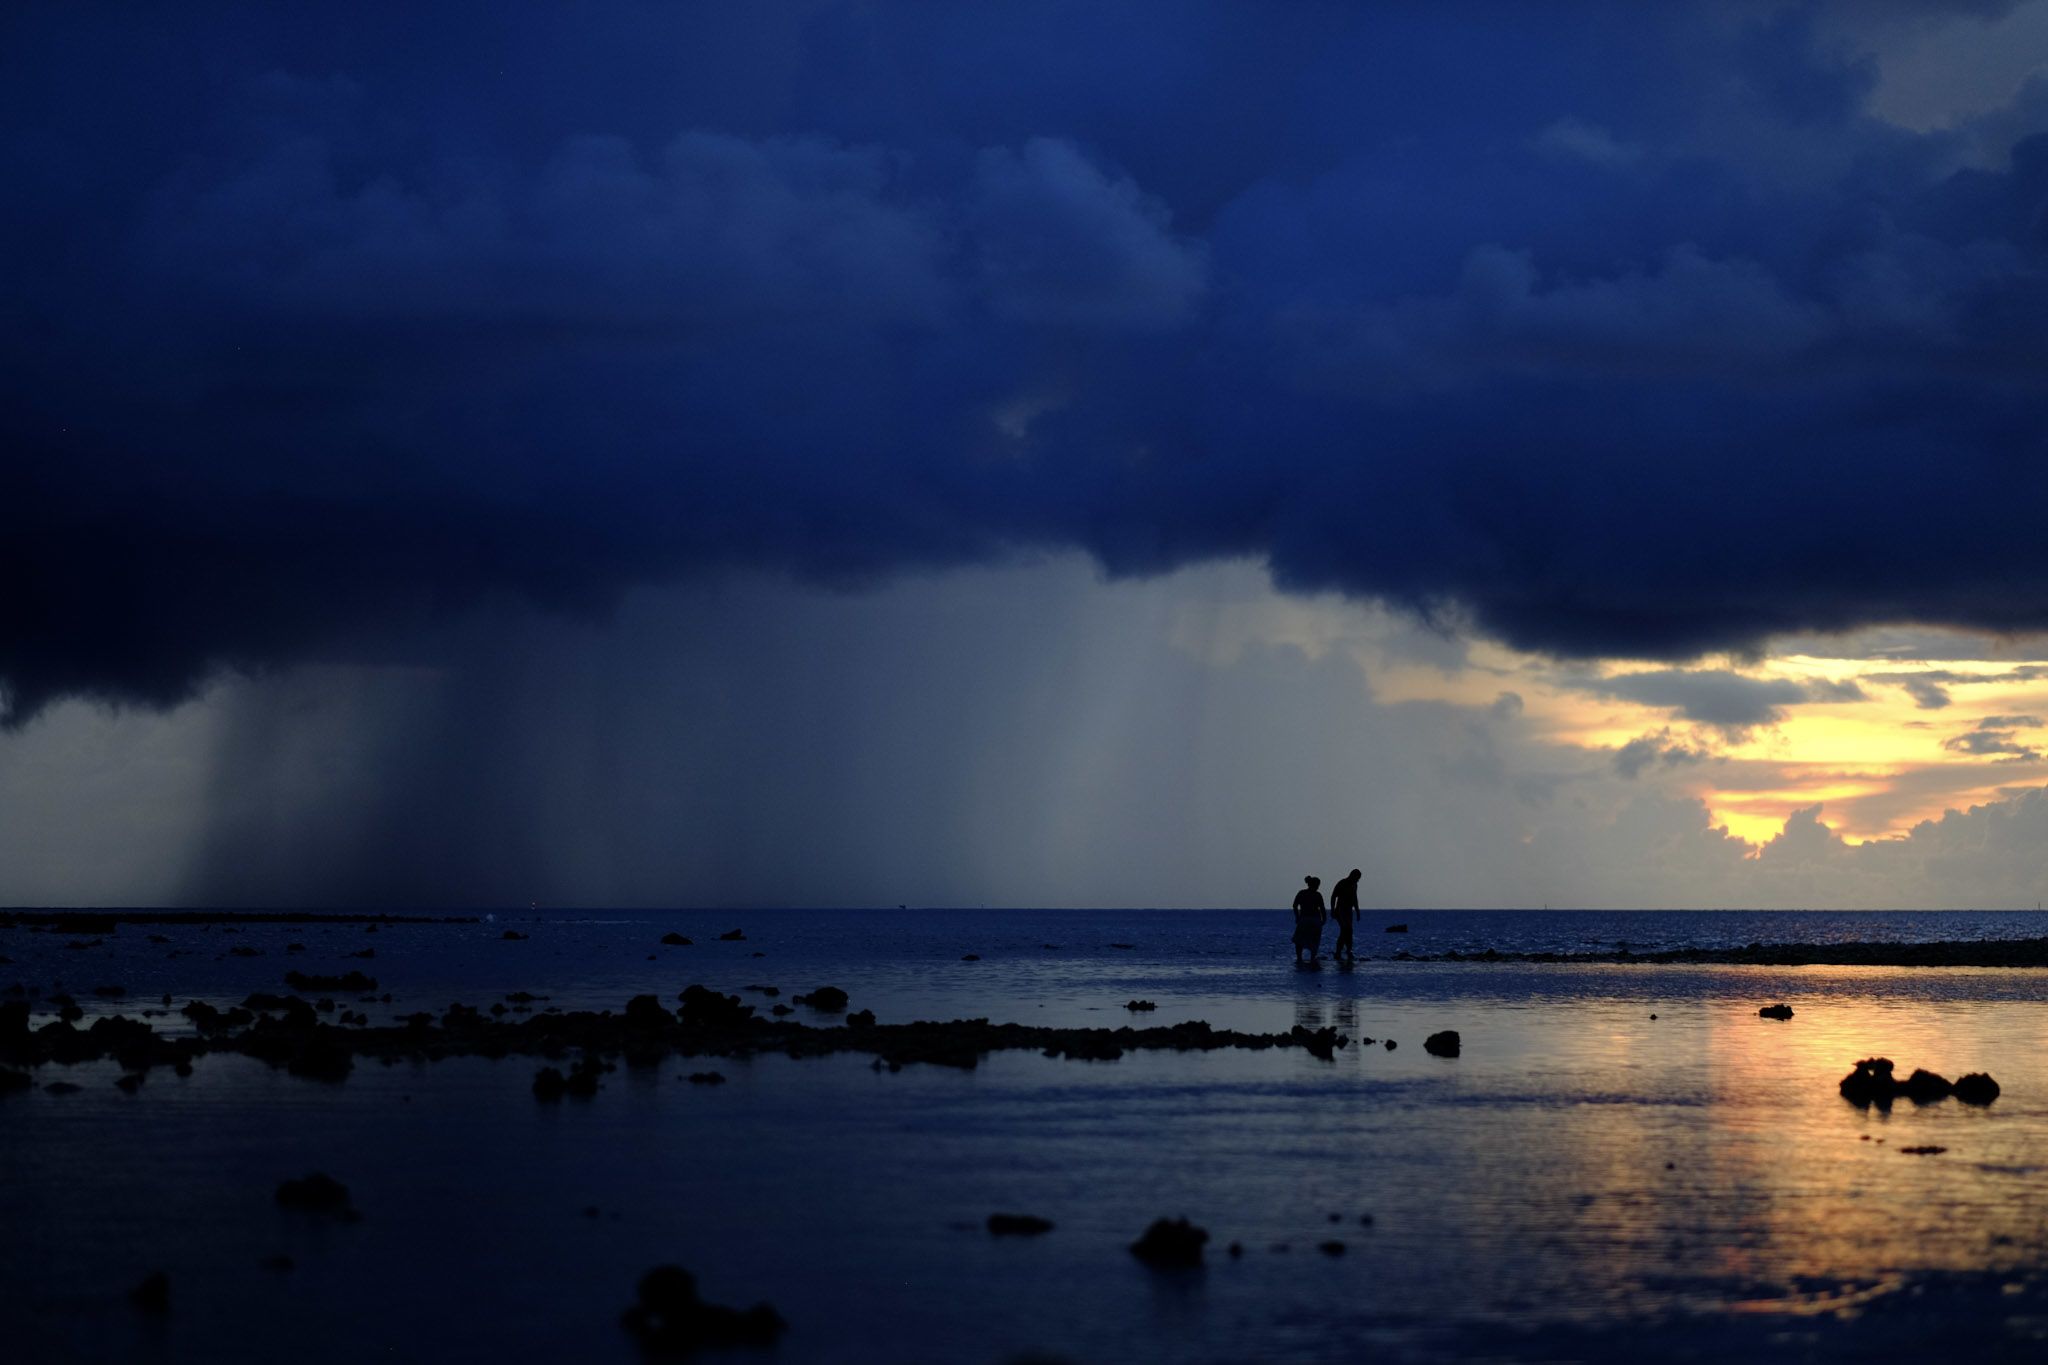 two figures on ocean edge with rainstorm approaching